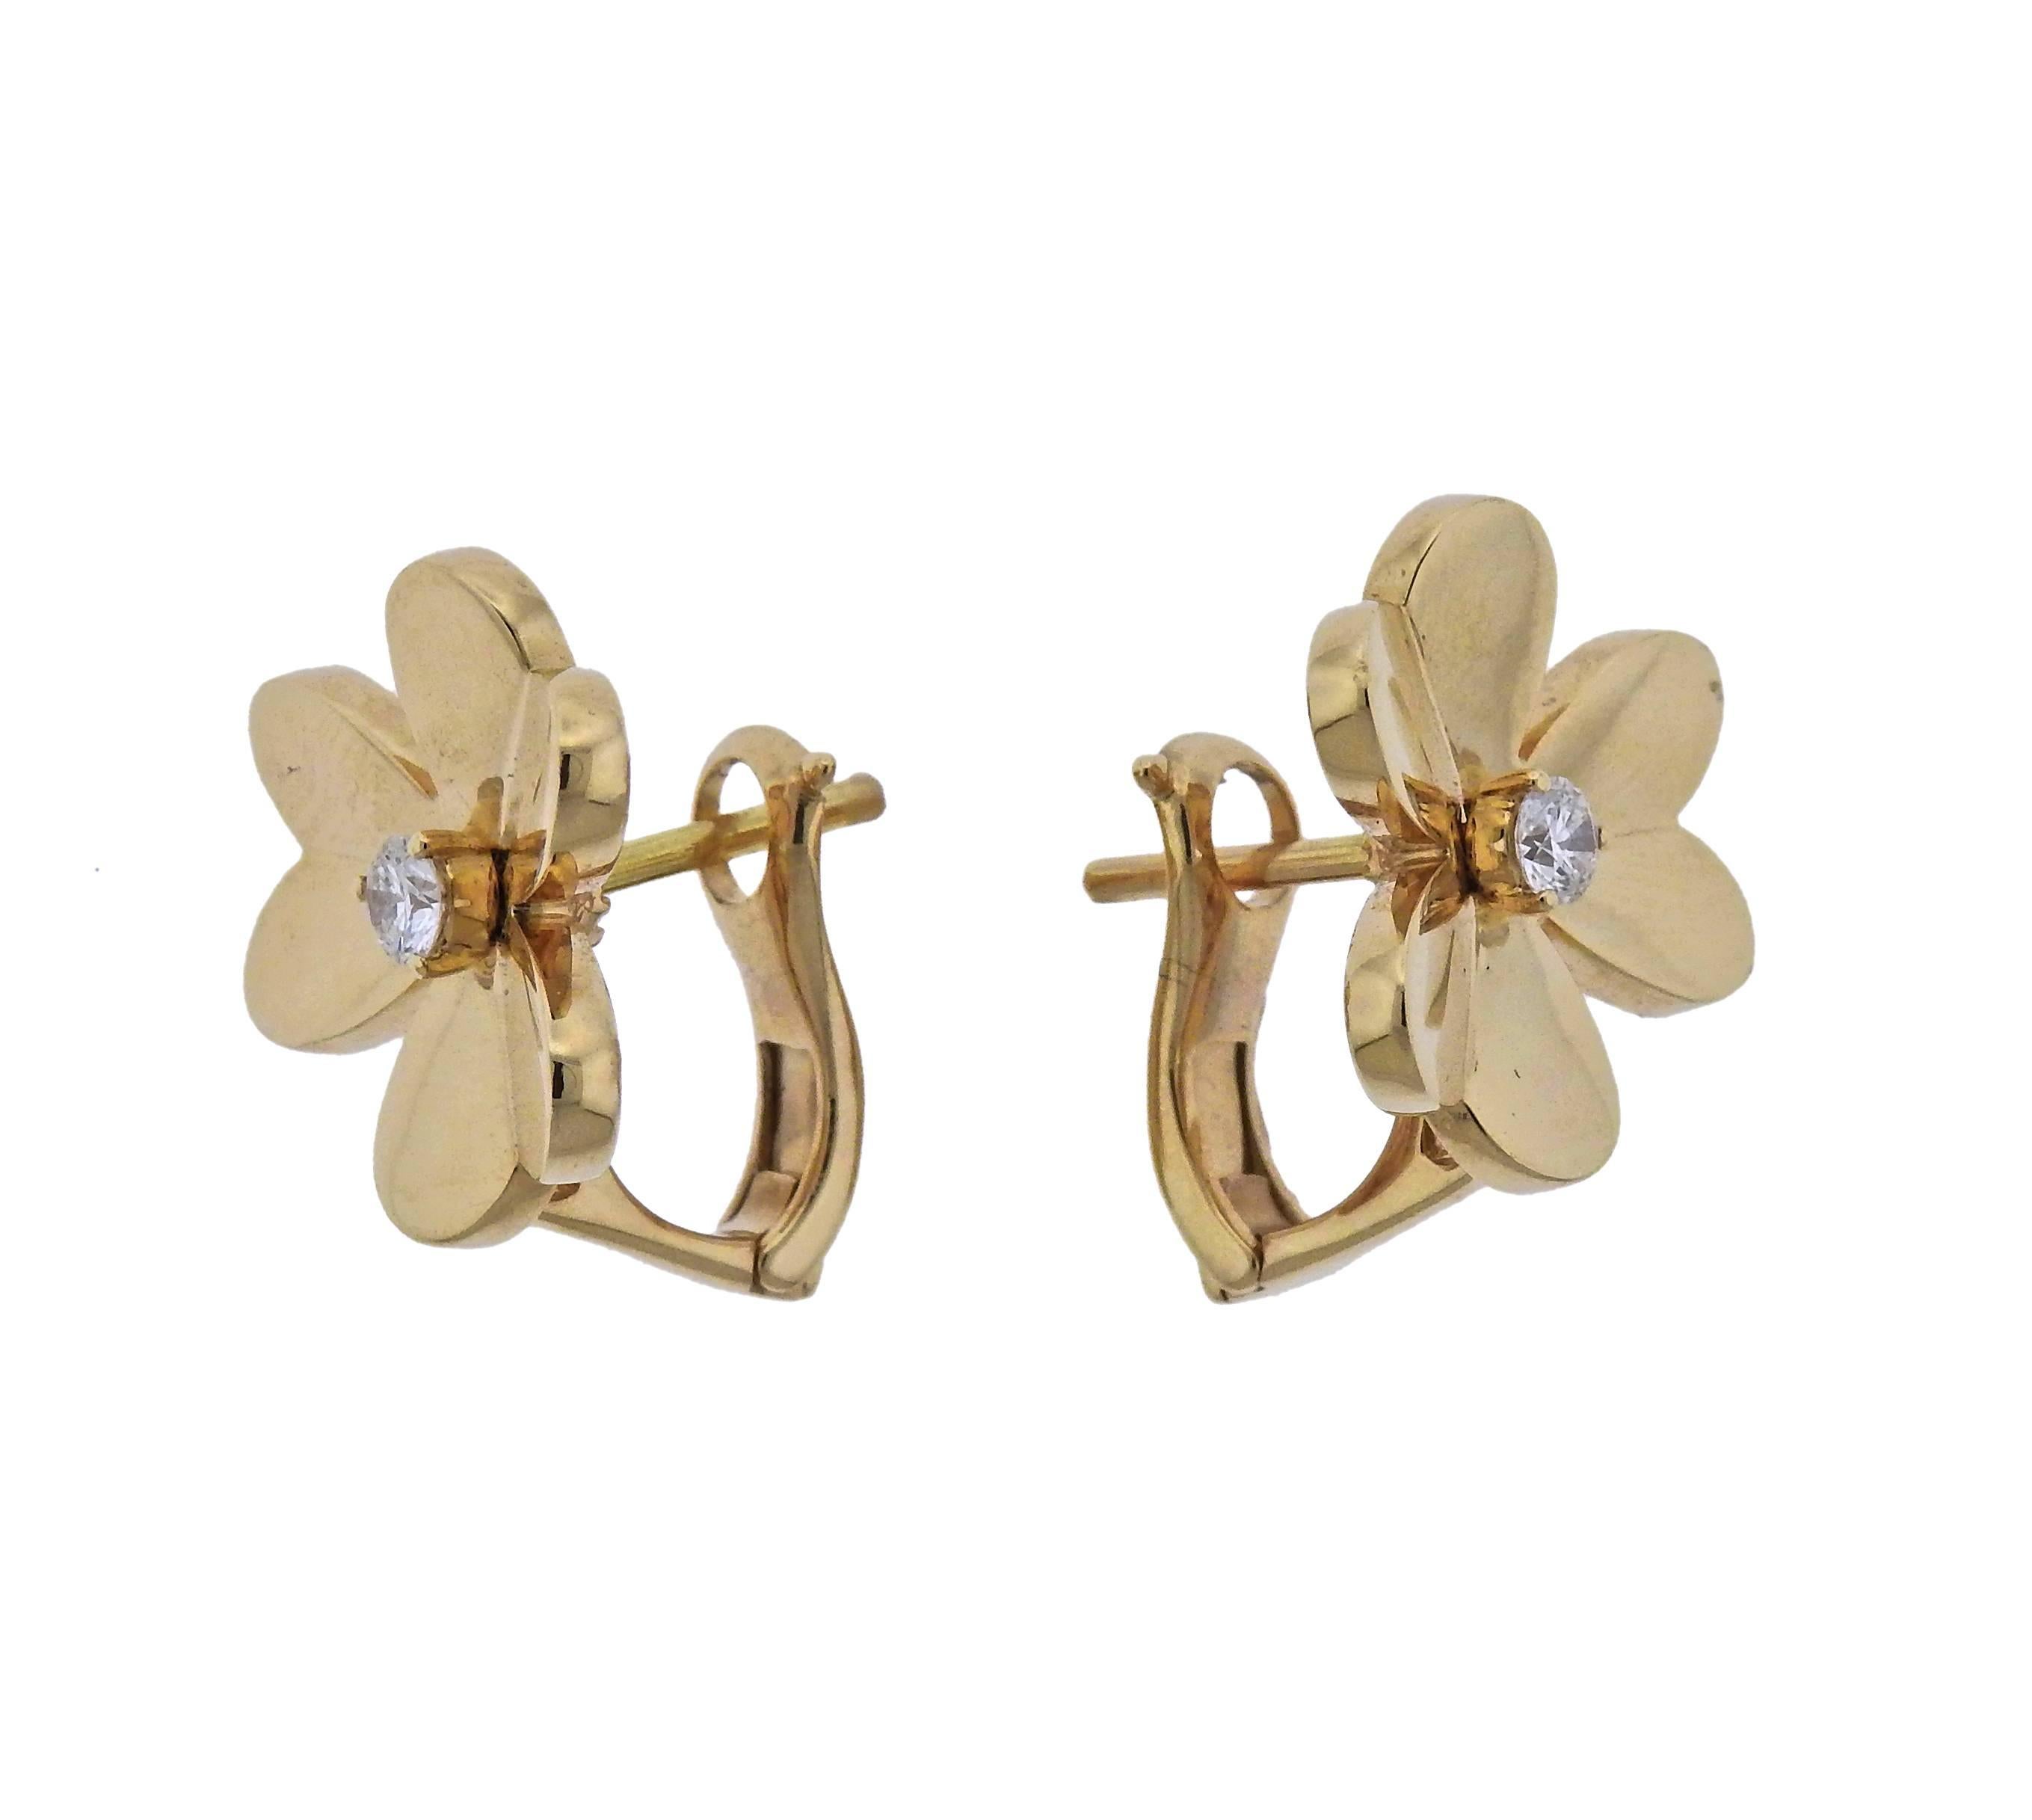 Pair of 18k yellow gold Frivole earrings, crafted by Van Cleef & Arpels, set with 0.17ctw in diamonds. Retail $5050, come with a pouch. Earrings are 15mm x 16mm, weight is 6.6 grams. Marked  VCA,  750, JB391***